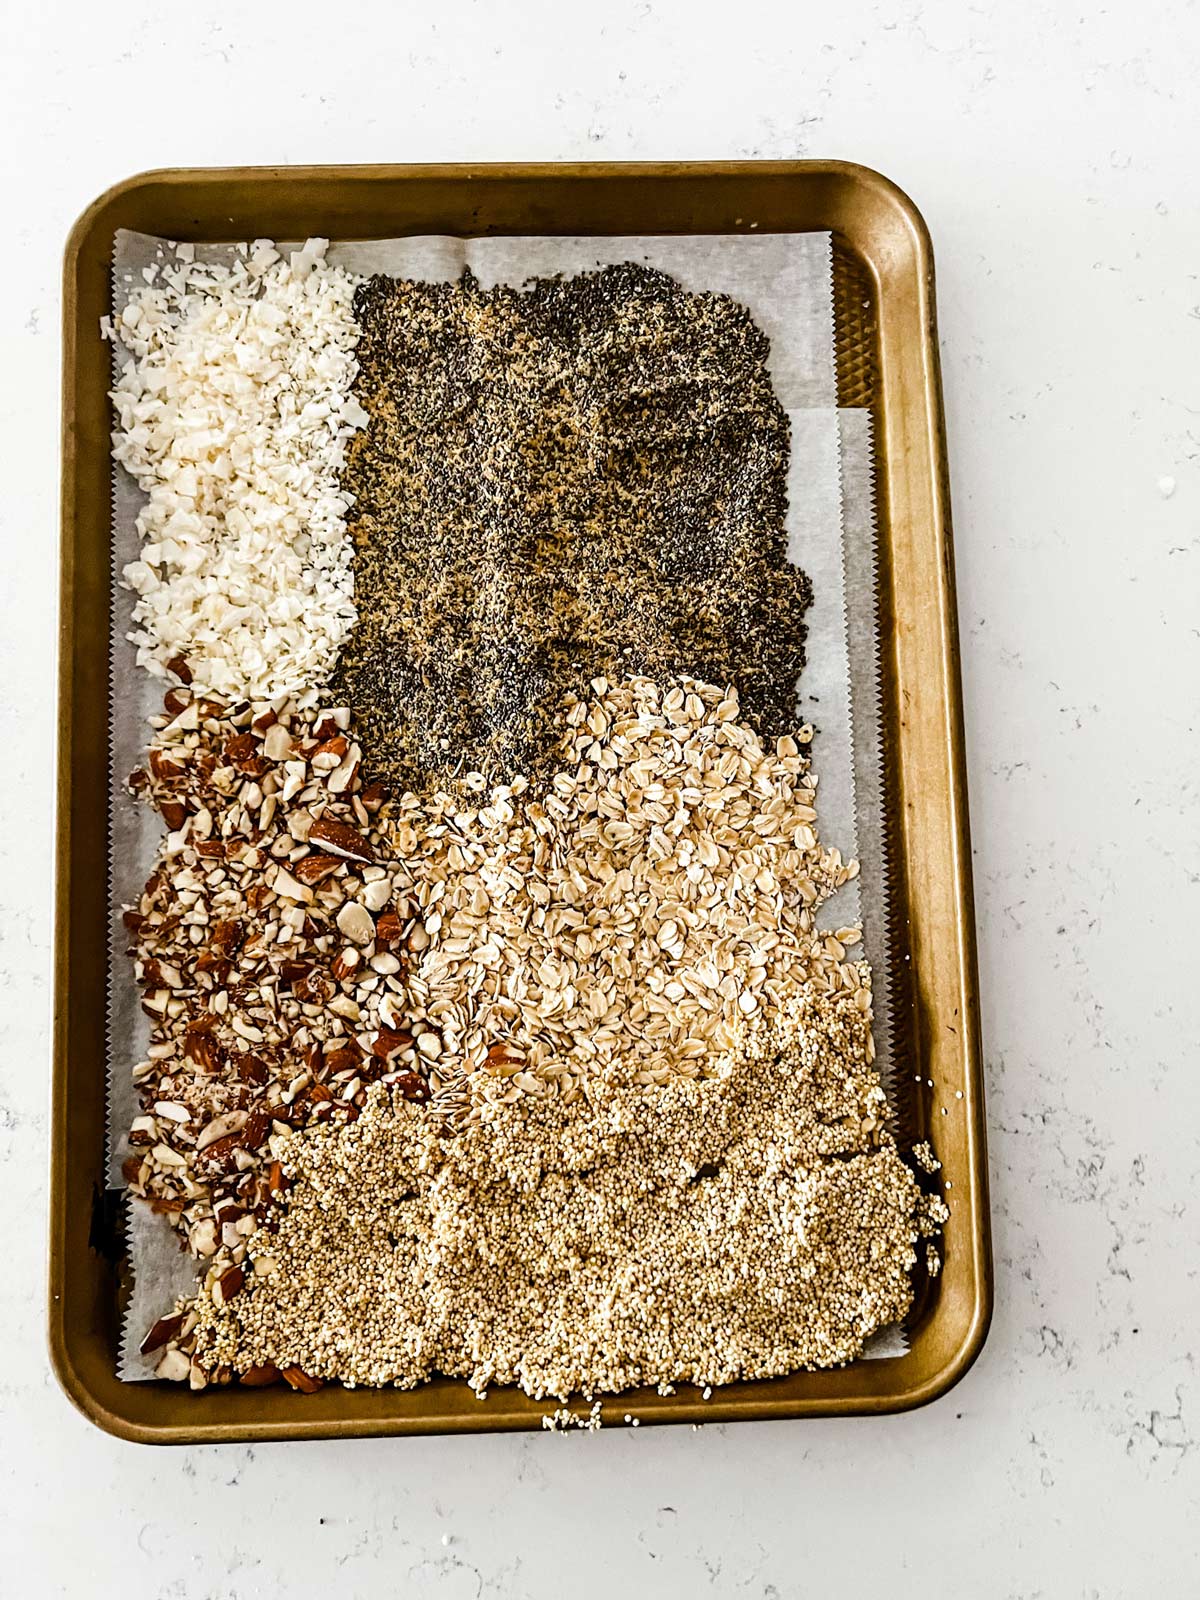 Photo of Quinoa, chia seeds, flax seeds, shredded coconut, oatmeal, and almonds on a parchment lined sheet pan.